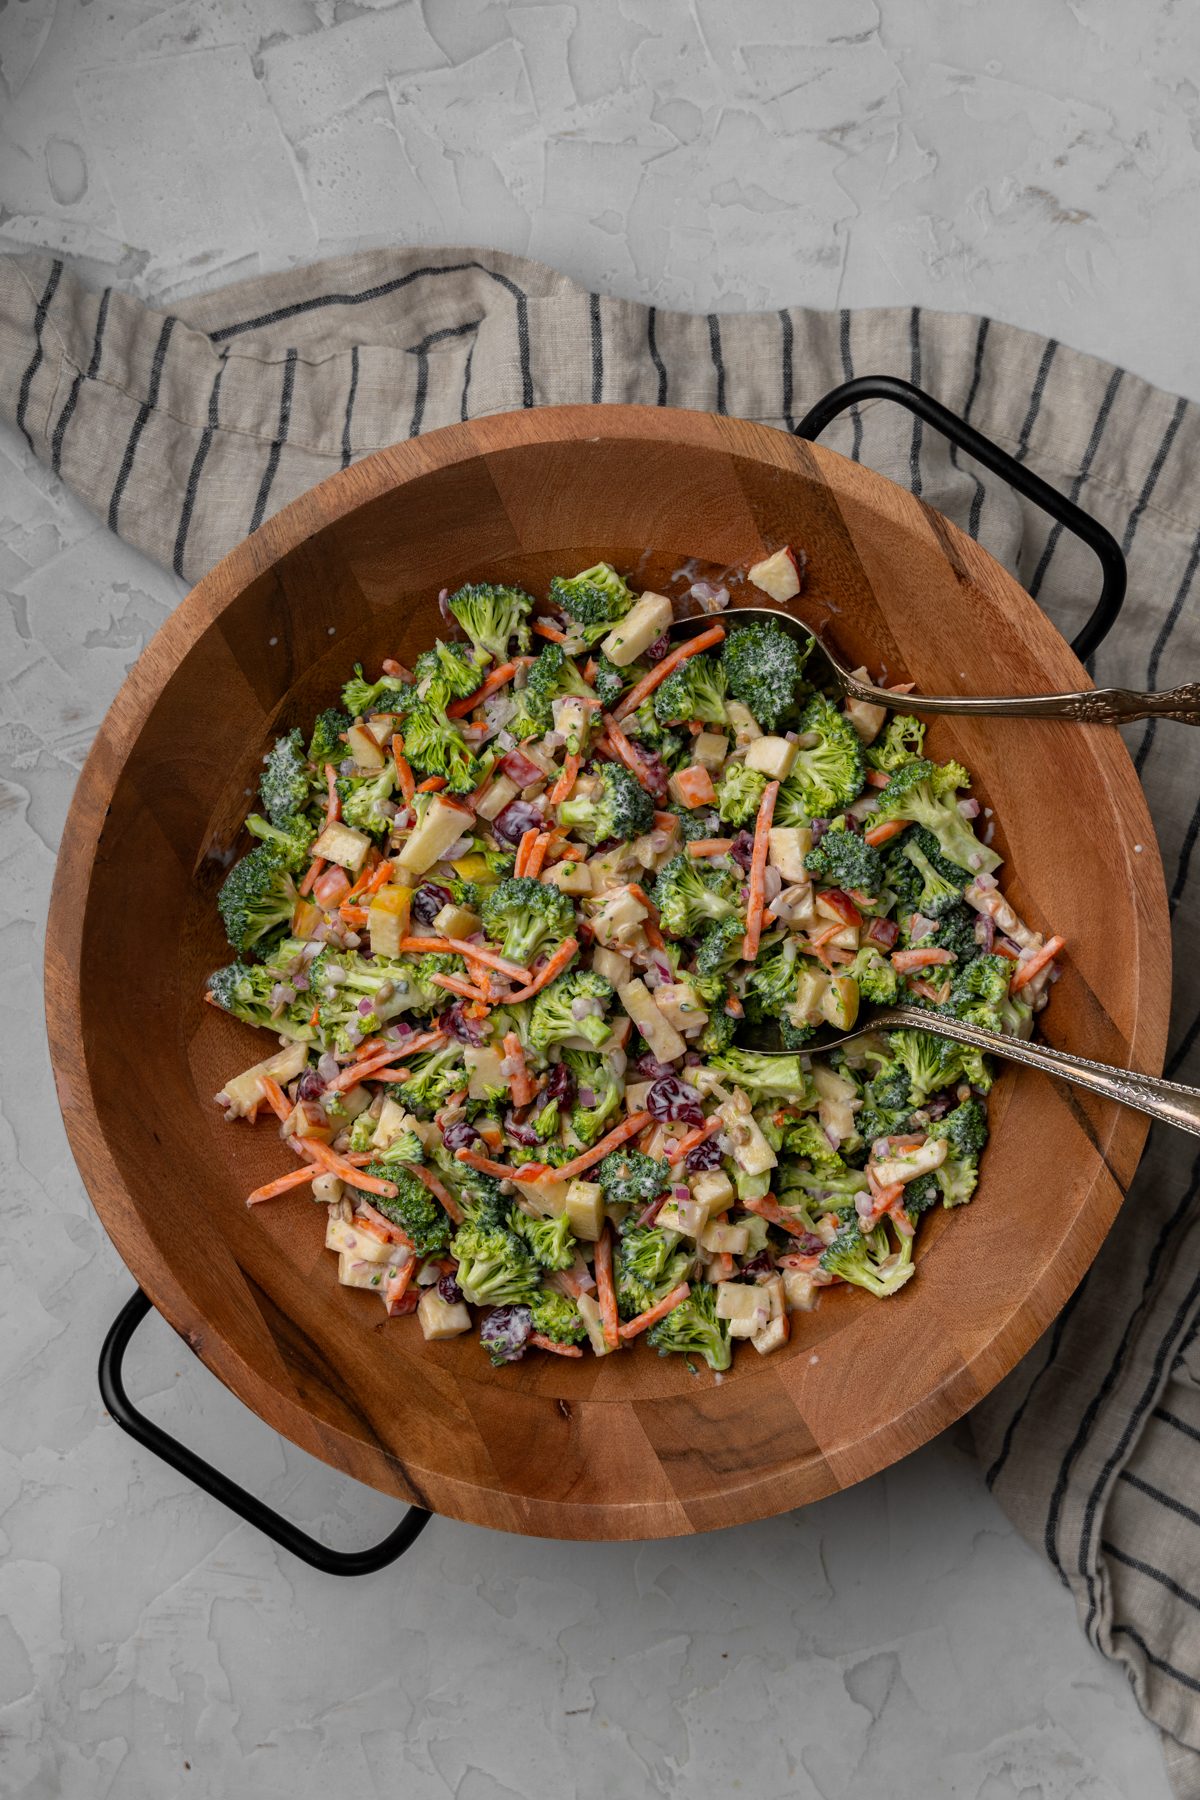 Colorful broccoli crunch salad in a wooden bowl.